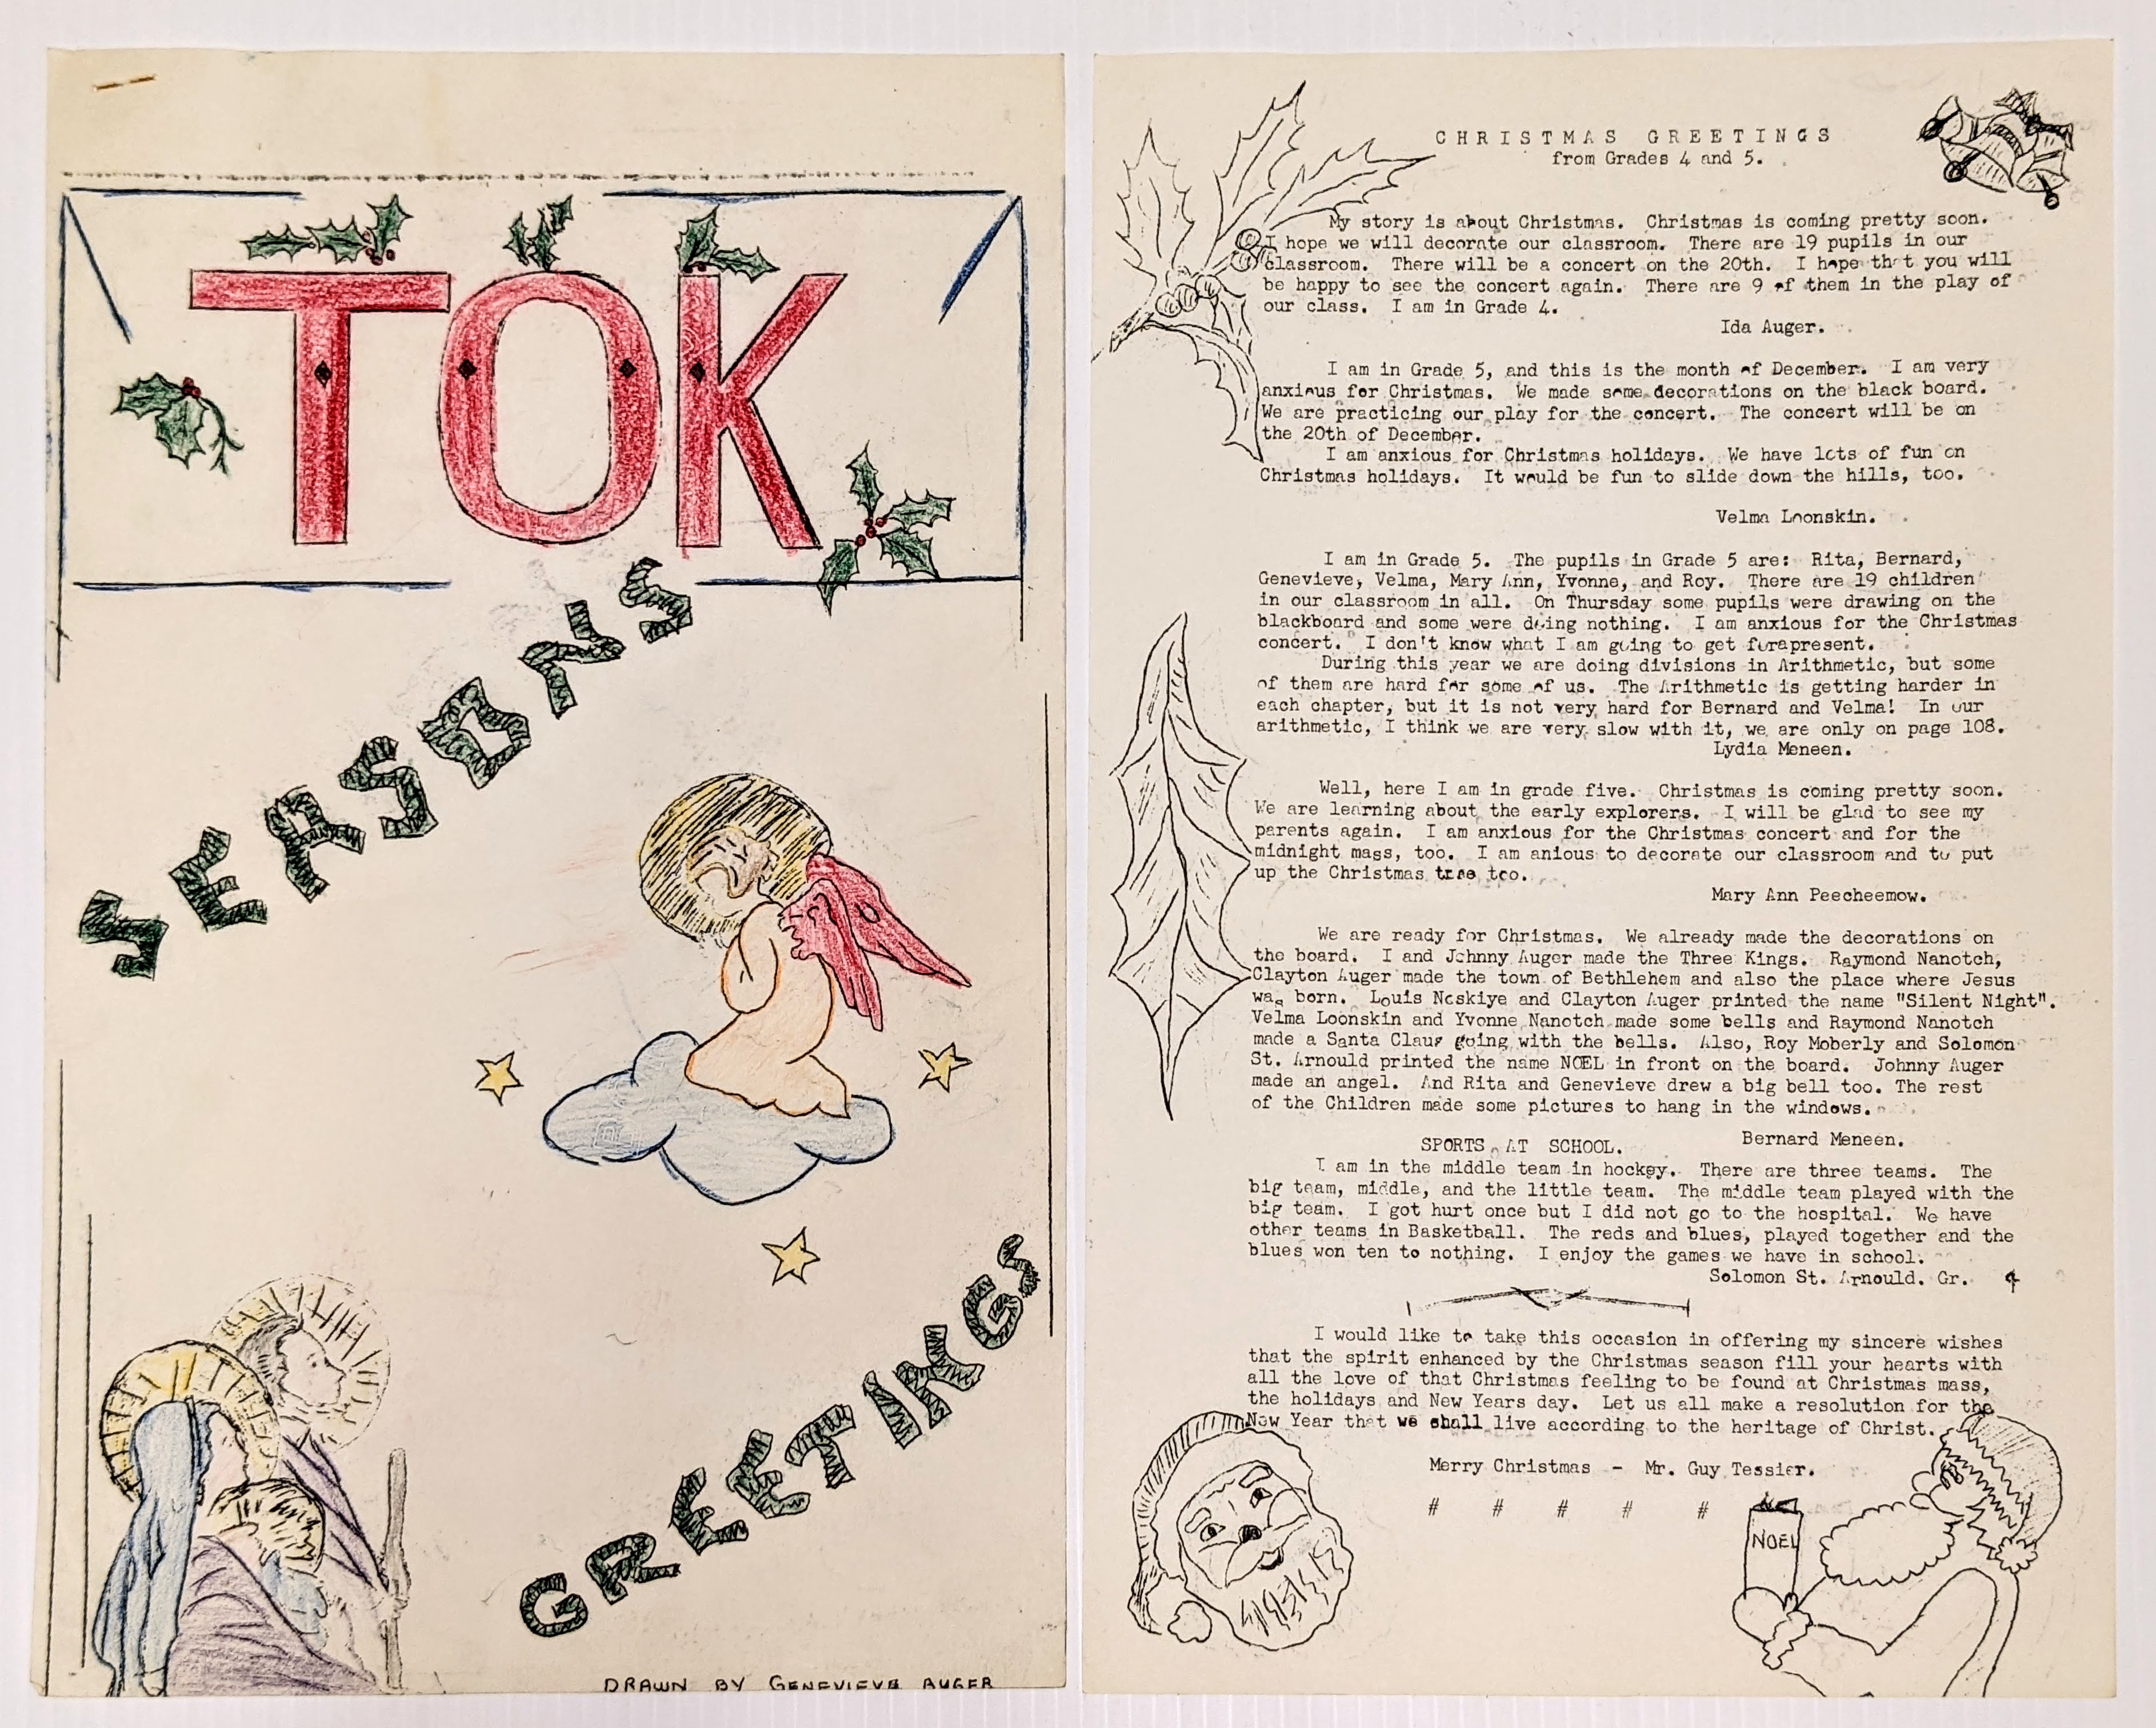 These two pages are original copies of the St Henri School Christmas Newsletter known as "TOK". This is the first edition and is dated December 1961. The newsletter contains all kinds of interesting details including interviews with various community members, Christmas wishes of various students, and pupils interpretation of the Christmas Story. If your interested in this news letter and want more information - stop by for a visit we have a copy you can flip through!
 If you know what the title "TOK" means - we would also love to know!
PS. If you read the greetings you will learn that on this day 60 years ago
these students were performing in their school Christmas Concert!
20/12/2021
998.01.47.01 / Newman, Jack and Pearl
